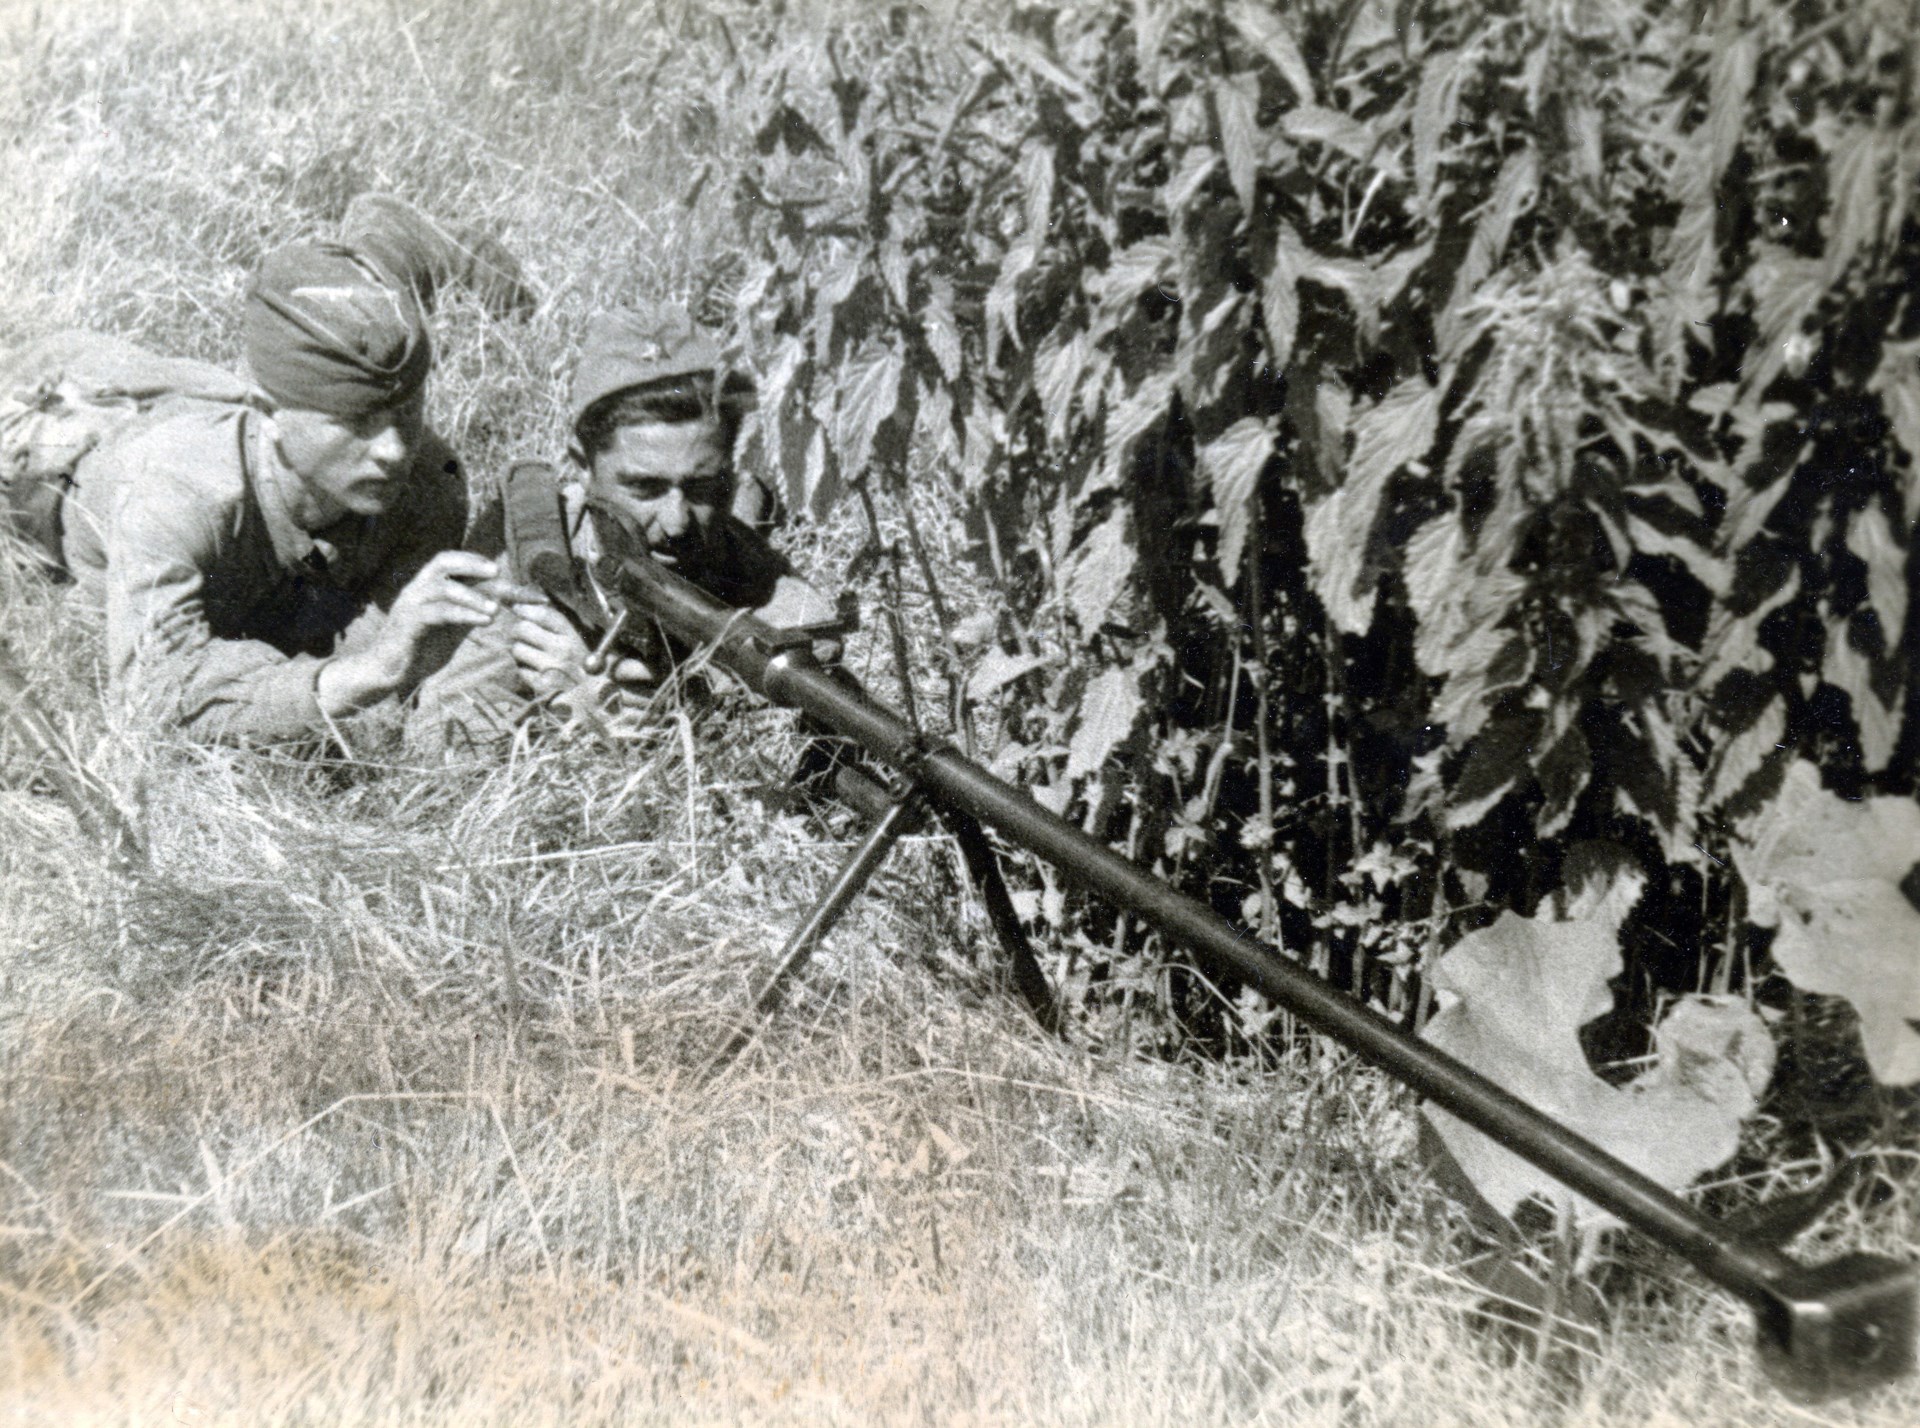 The Soviet PTRD-41 14.5 mm anti-tank rifle gave Soviet partisans a measure of anti-tank capability, along with powerful sniping and long-range bunker-busting ability. NARA